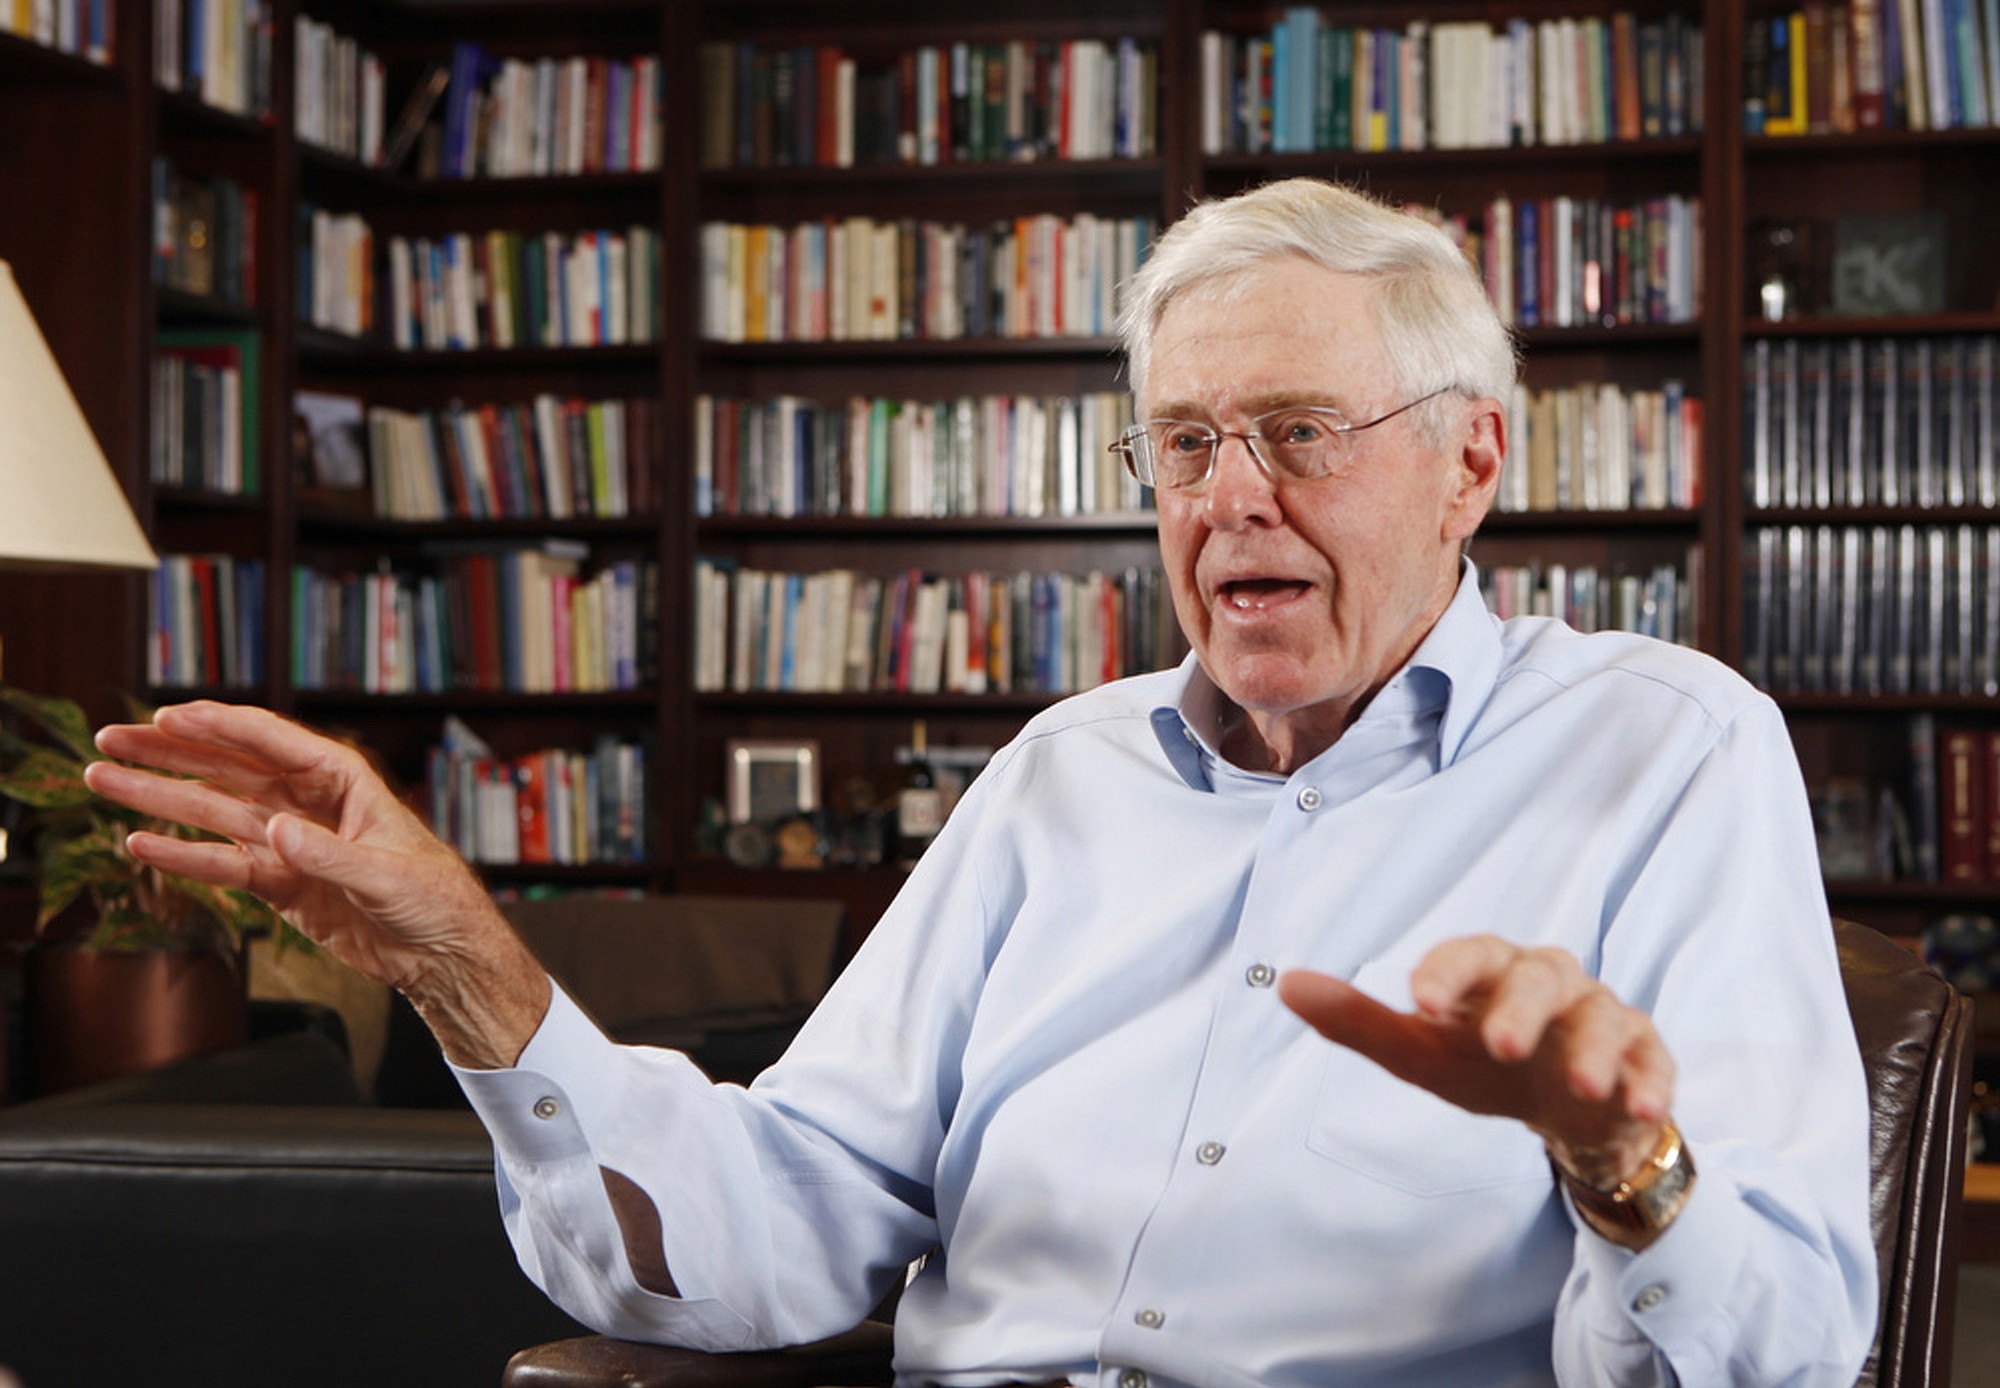 Wichita Eagle files
Billionare industrialist Charles Koch has warned that conservatives must demand a smaller government, or America is &quot;done for.&quot;